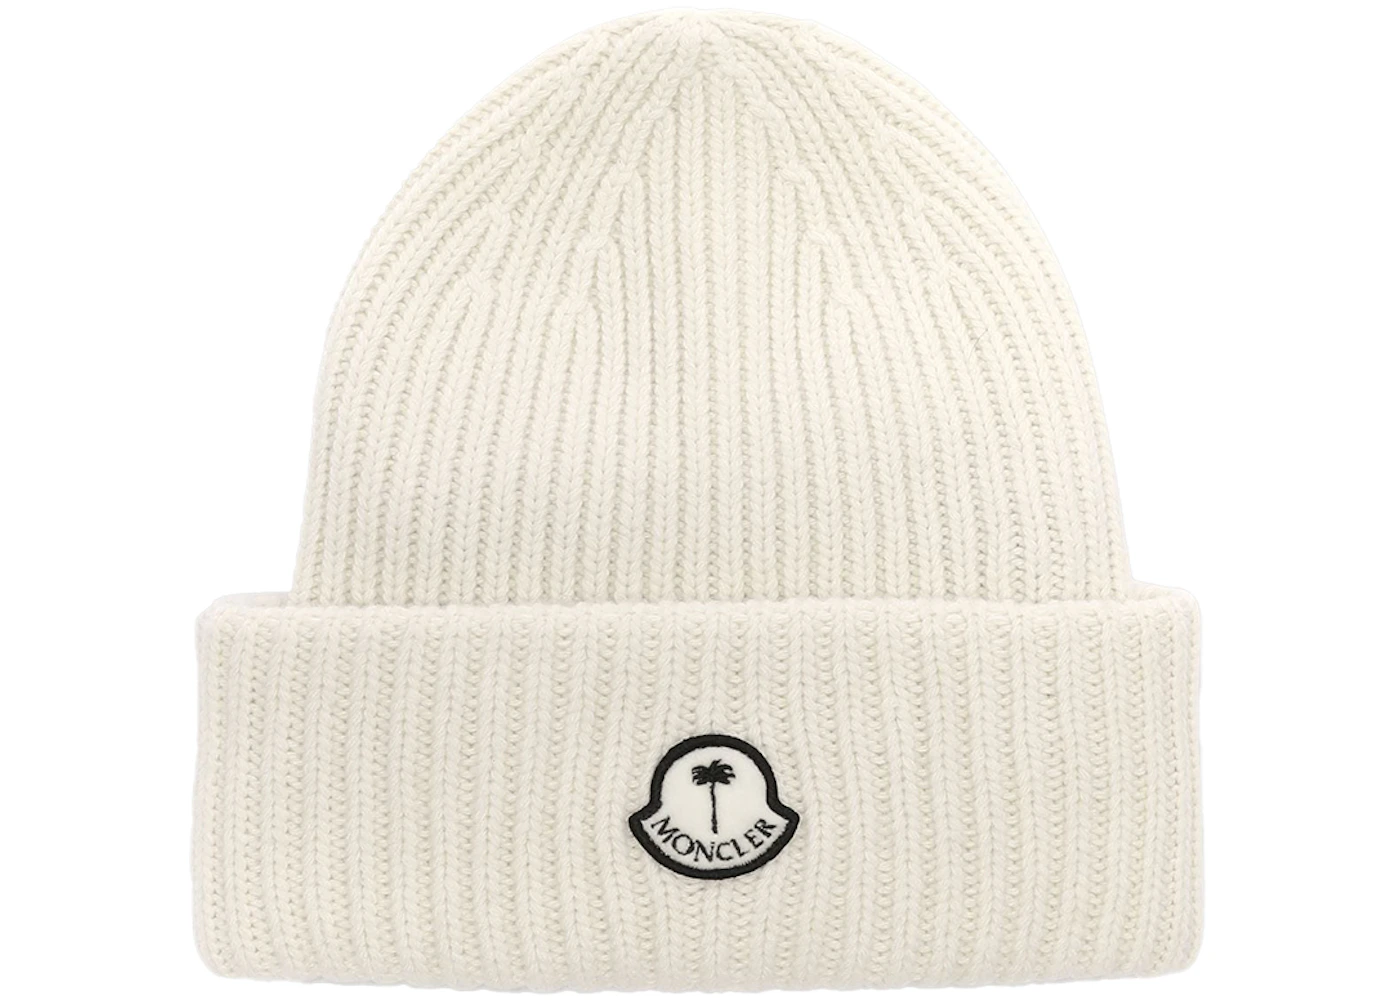 Moncler x Palm Angels Patched Ribbed Beanie FW21 White - FW21 Herren - DE